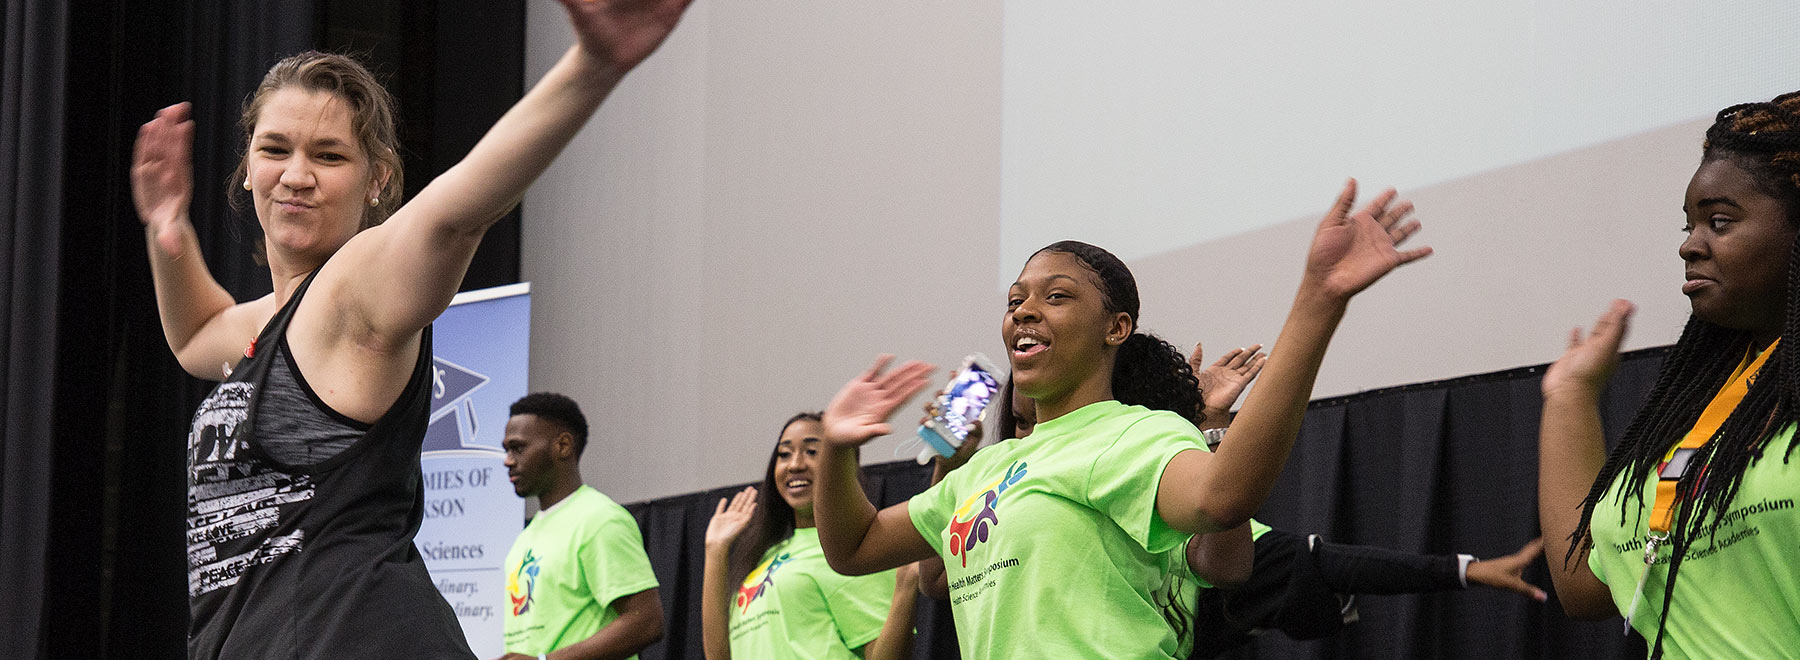 Josie Bidwell, a Zumba instructor and UMMC School of Nursing associate professor, leads teens at the Youth Health Matters Symposium in a dance session to open the Wednesday meeting.